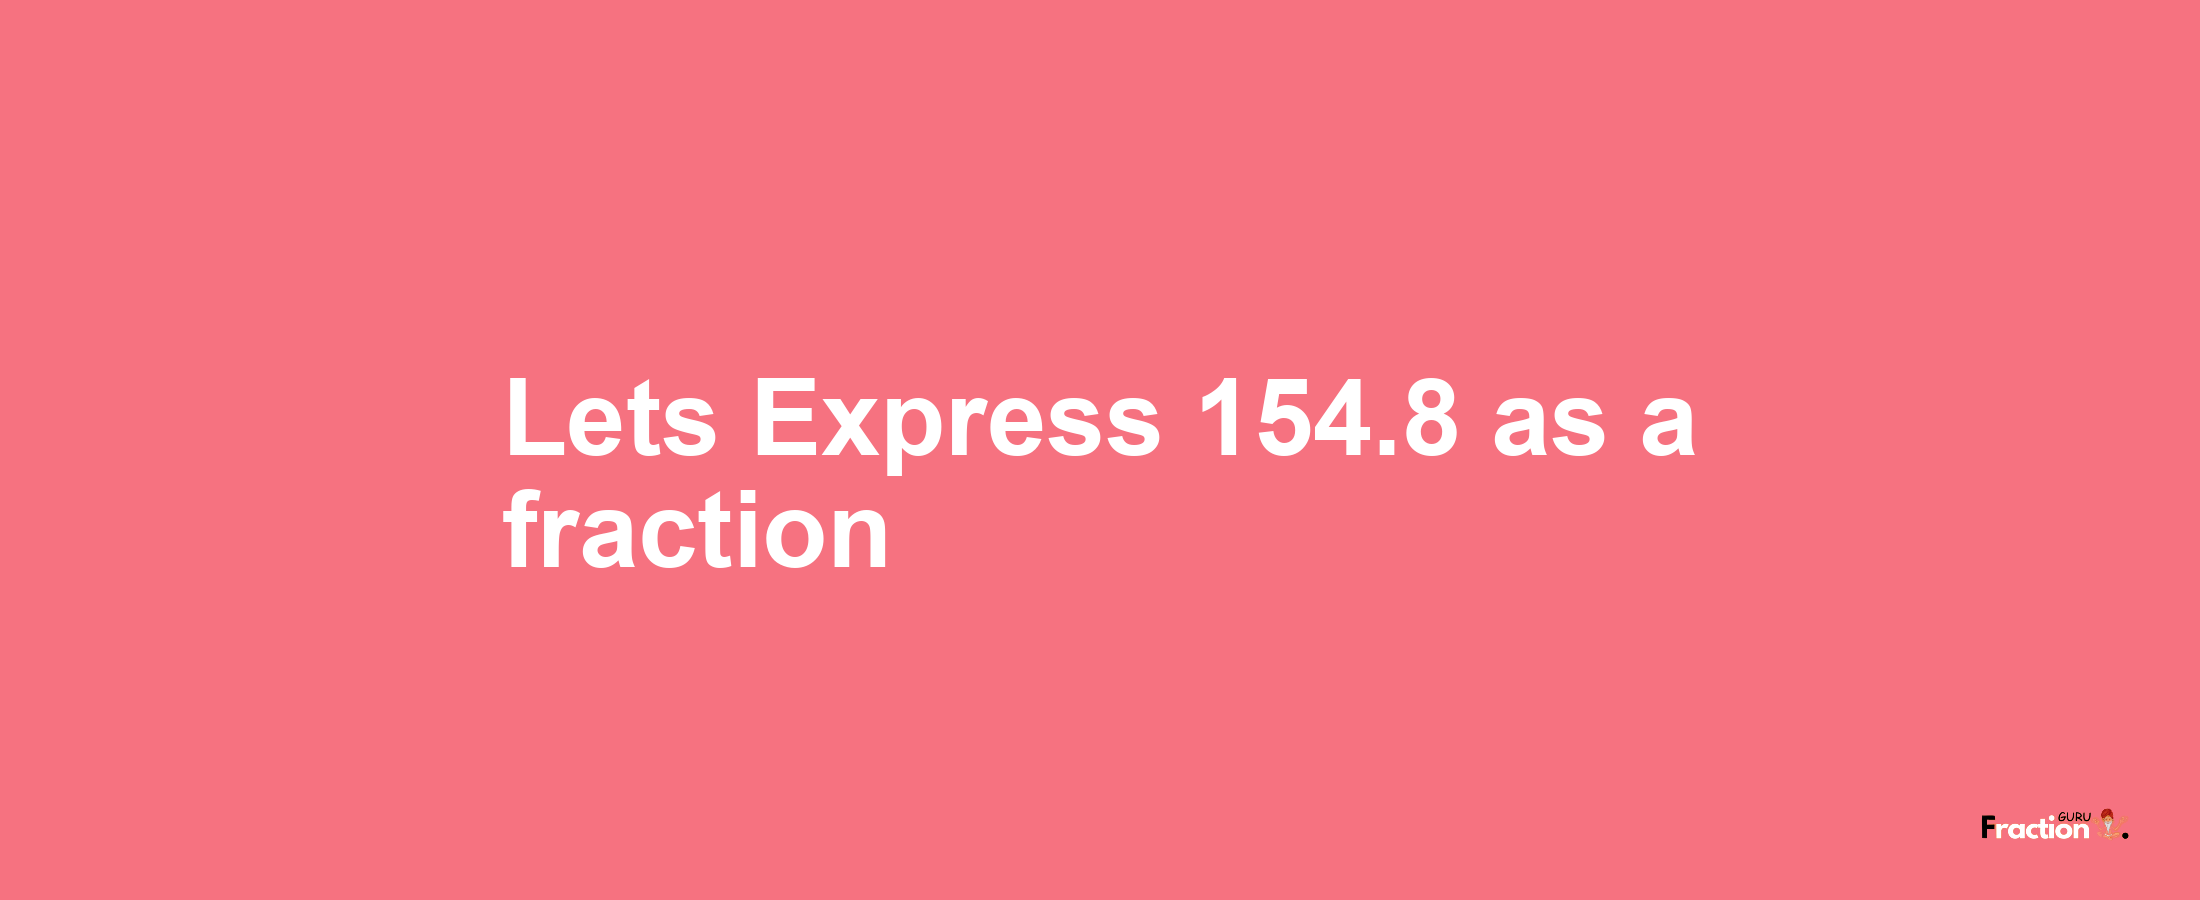 Lets Express 154.8 as afraction